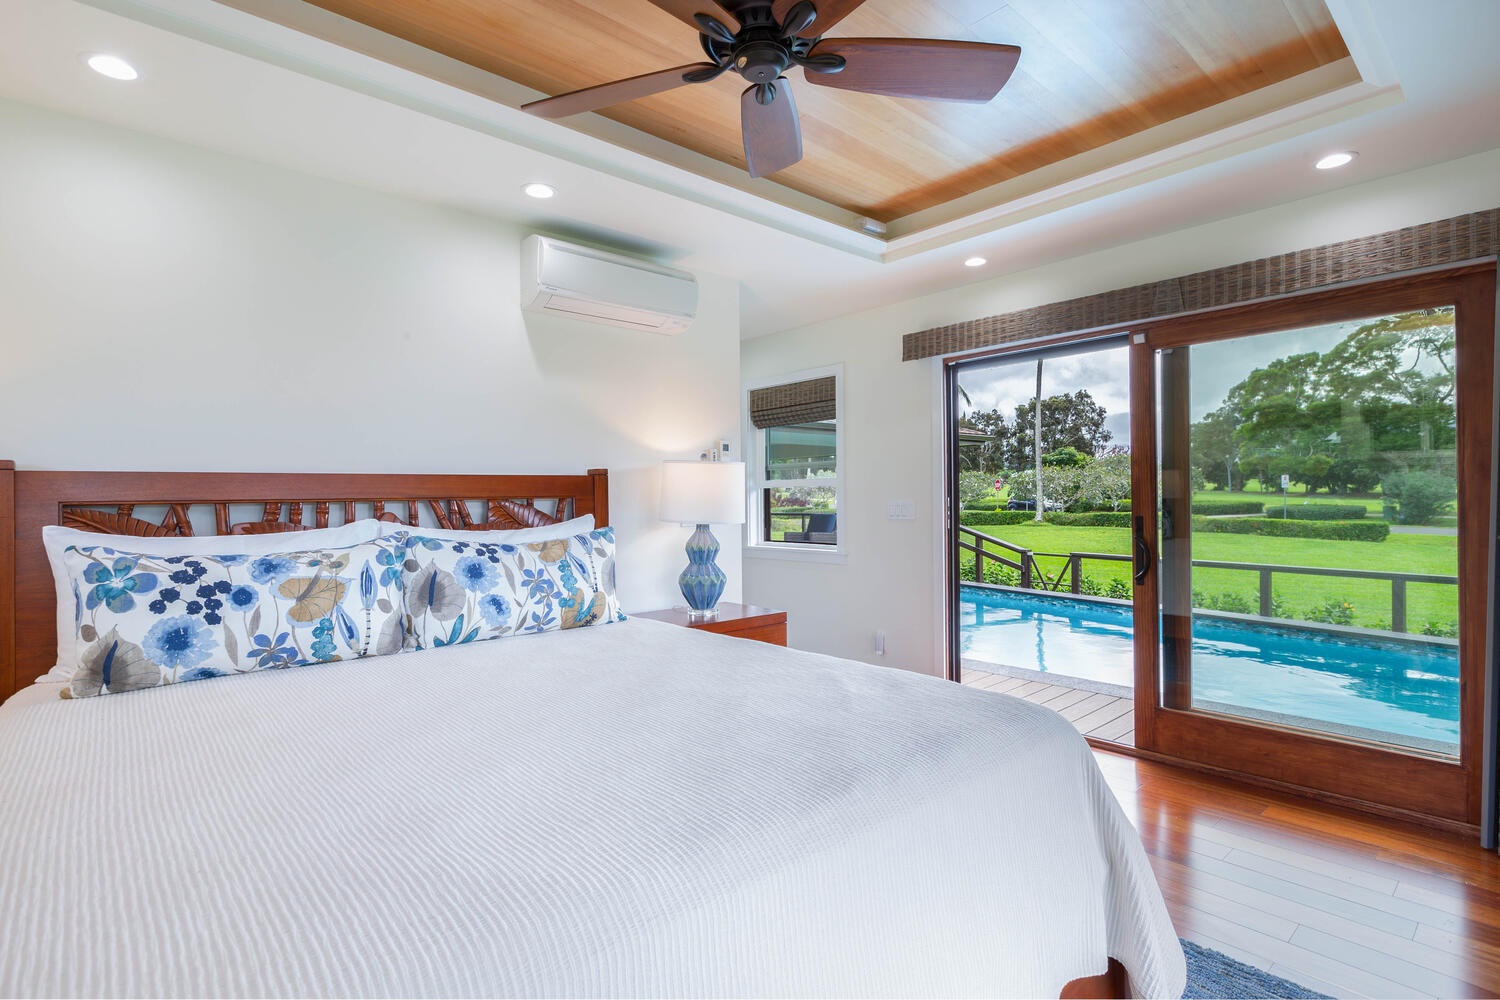 Princeville Vacation Rentals, Aloha Villa - Pool view first thing in the morning!